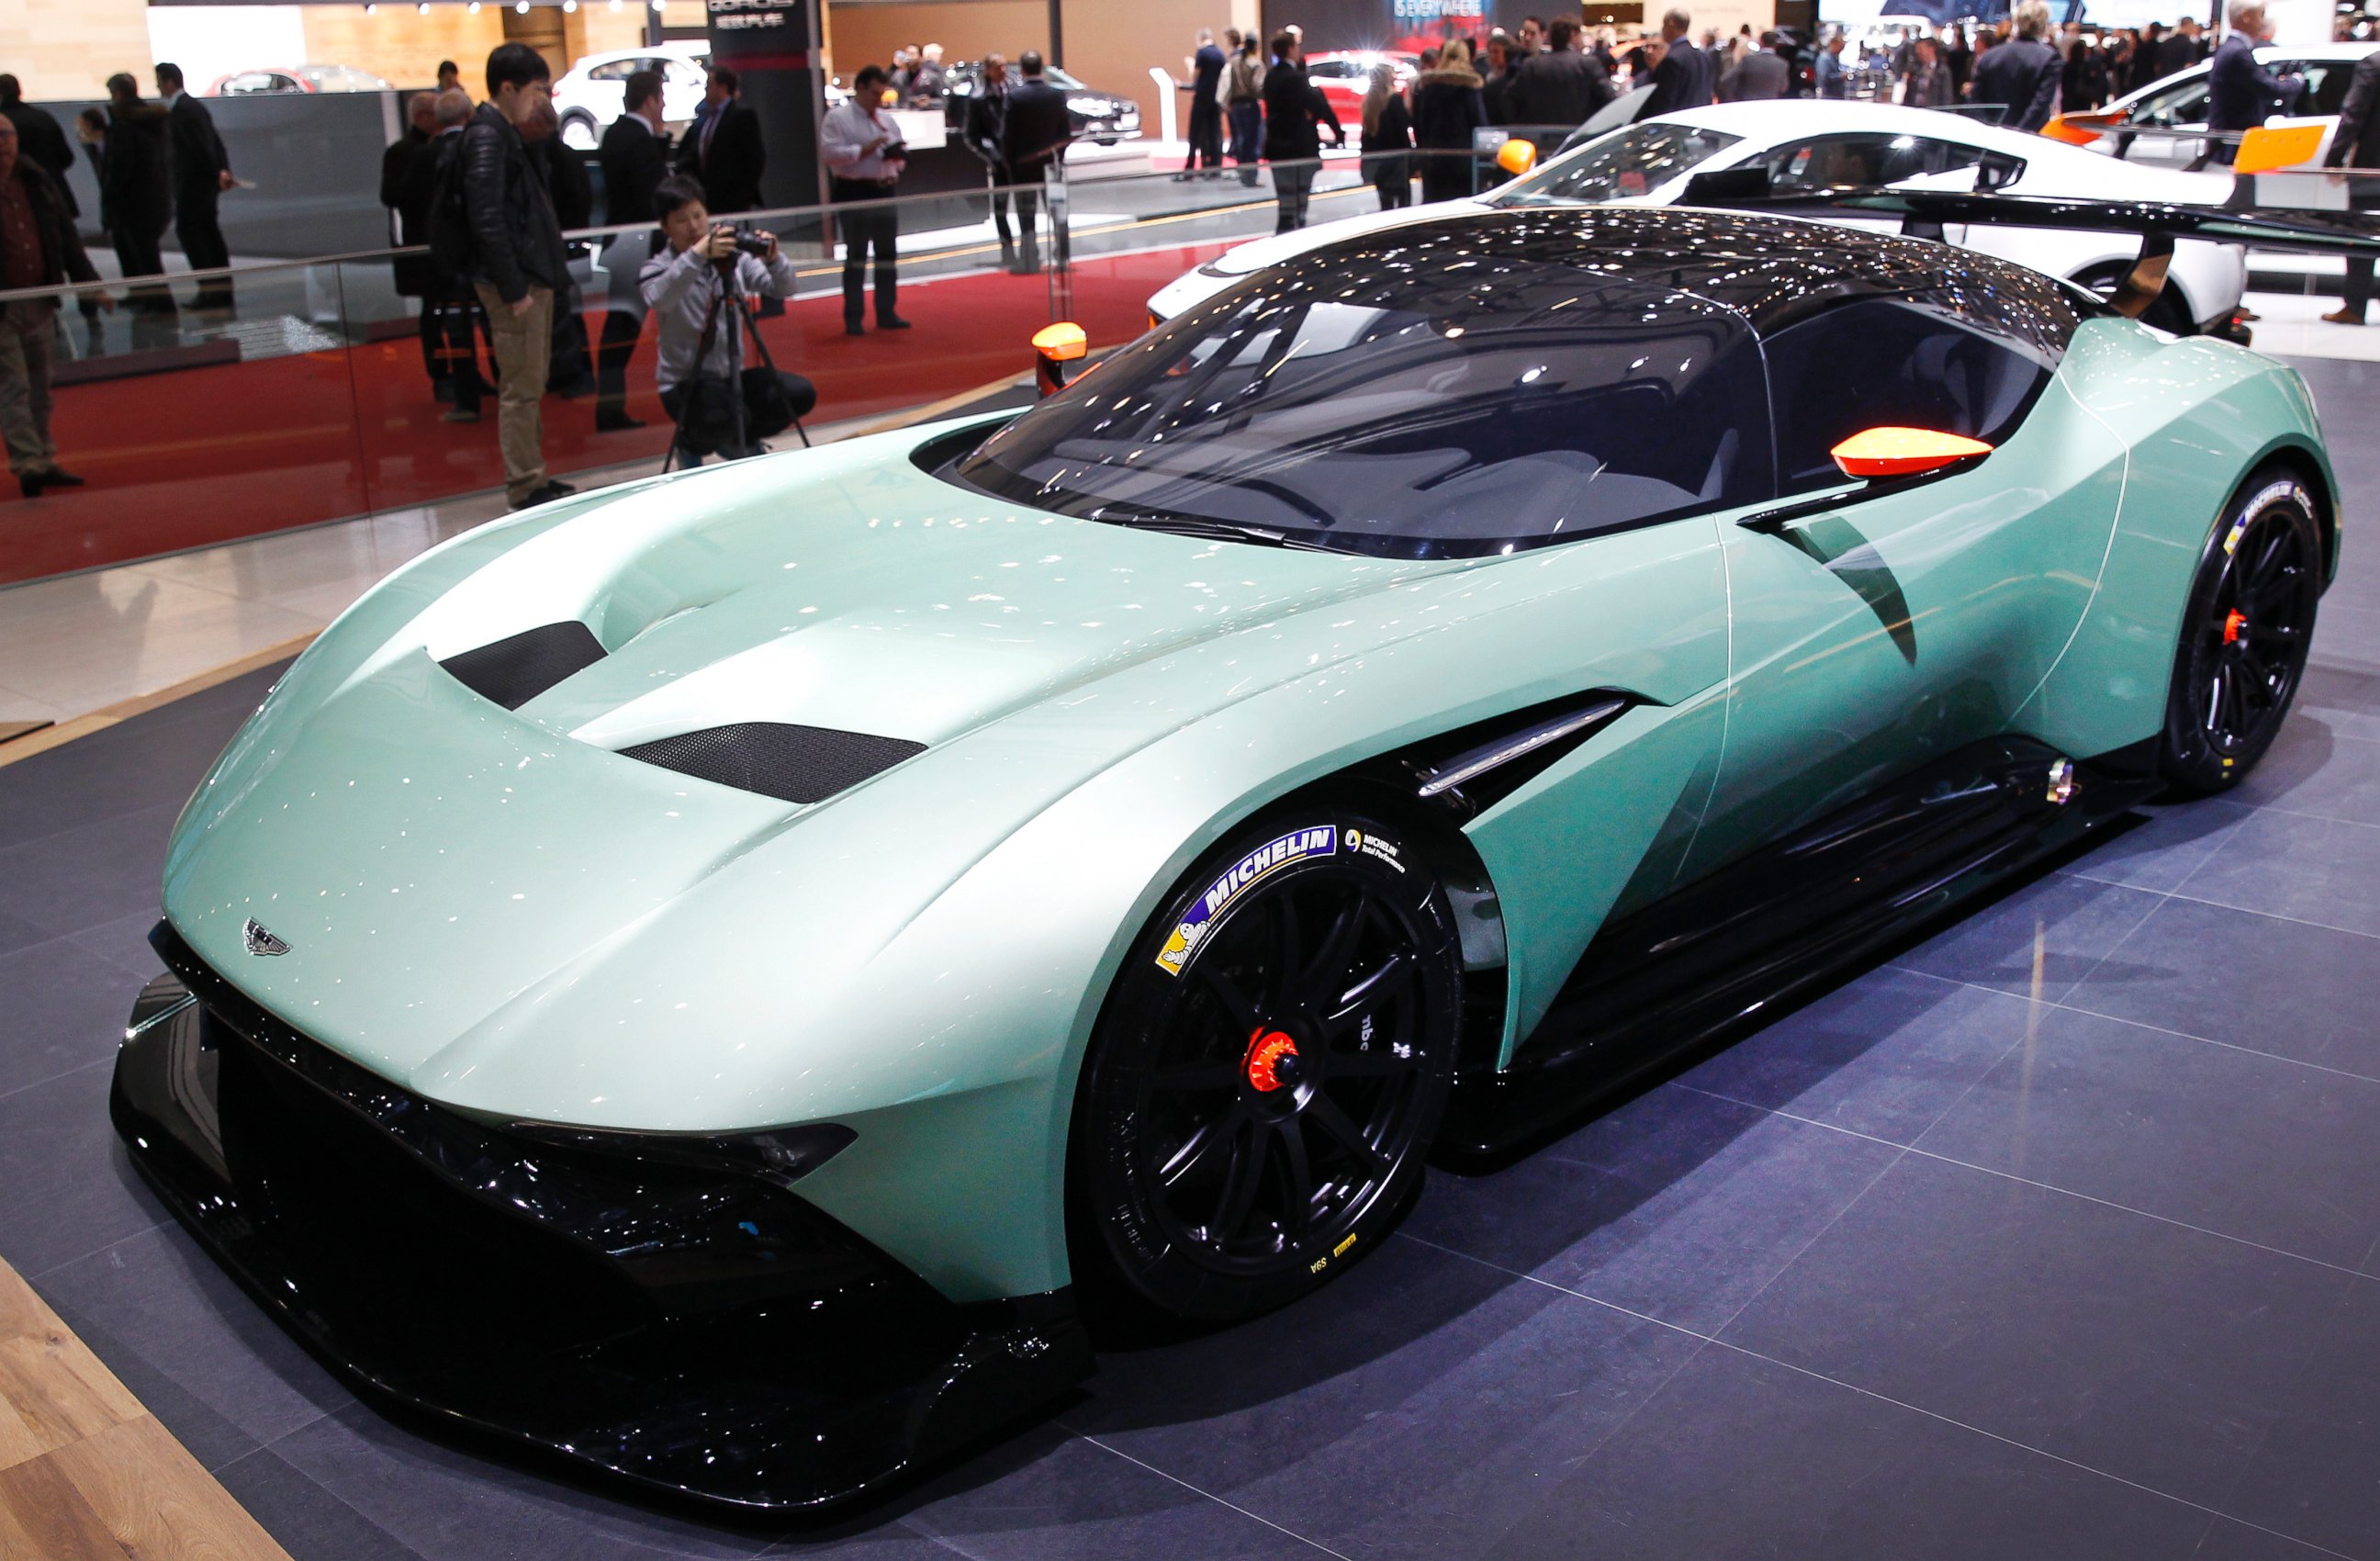 PHOTO: A Aston Martin Vulcan is presented during the press day 85th Geneva International Motor Show on March 4, 2015 in Geneva, Switzerland. 